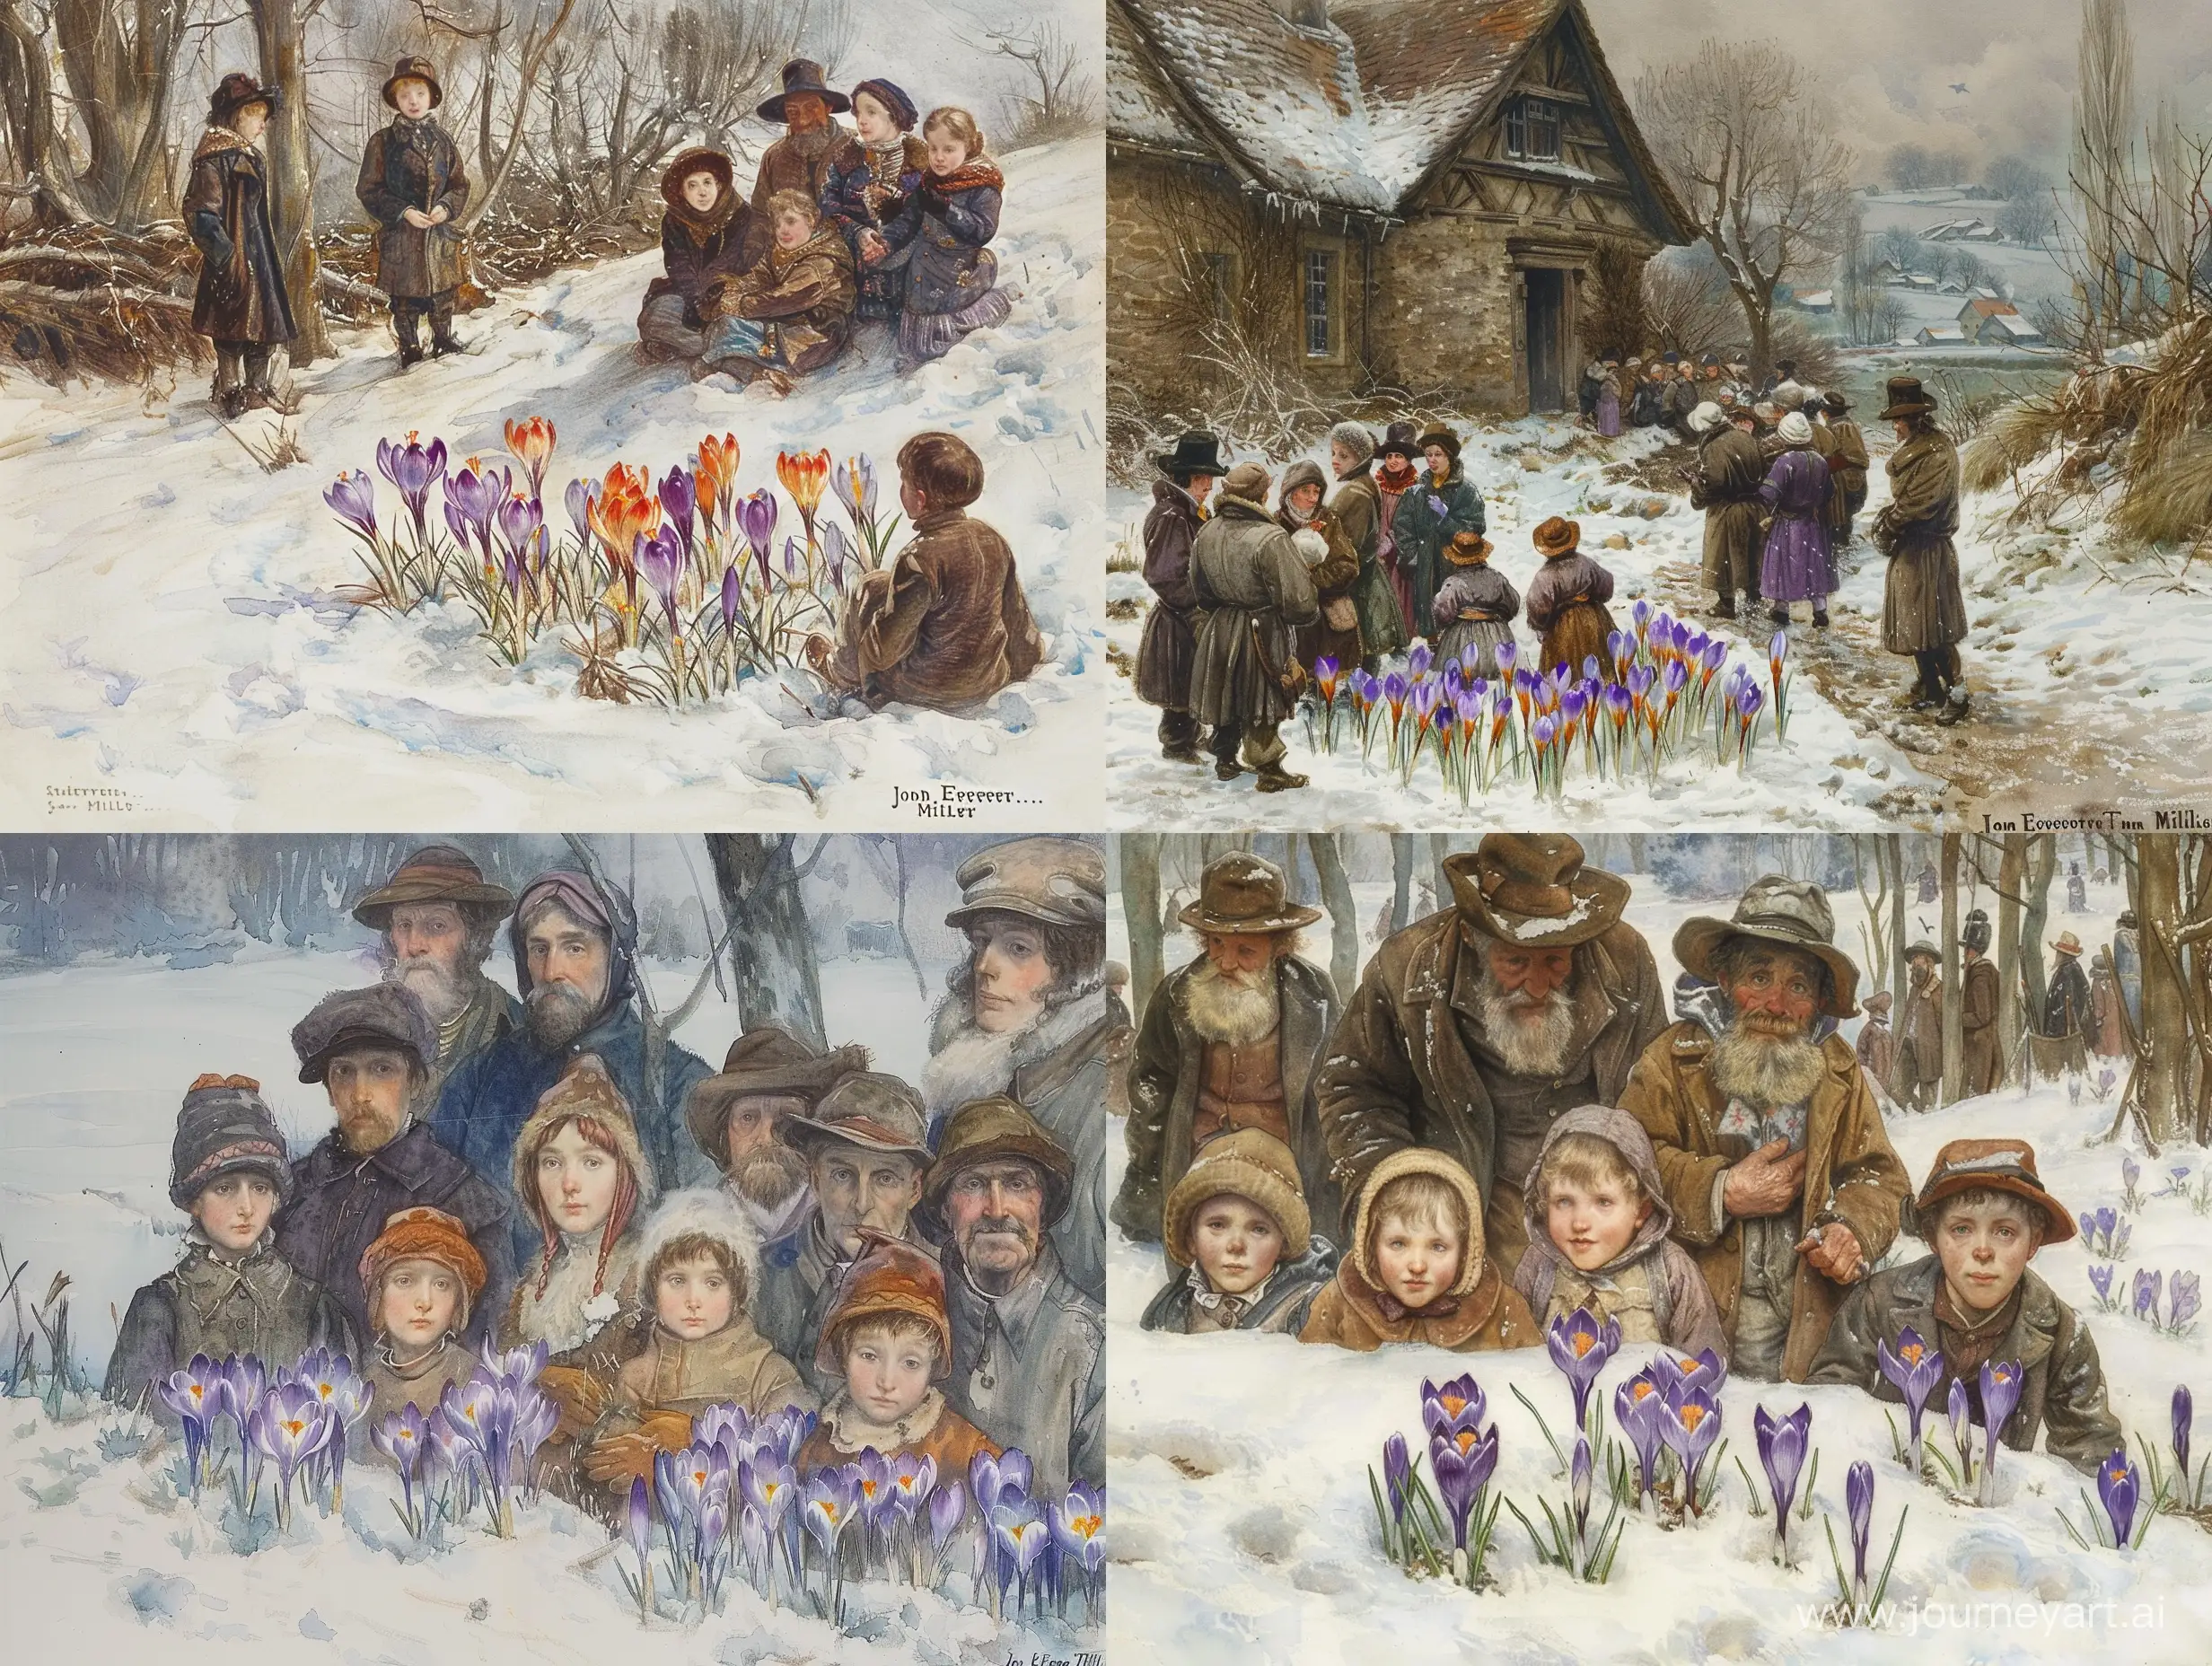 Vibrant-Crocuses-Blooming-in-Snow-Captivating-Watercolor-Painting-by-John-Everett-Millais